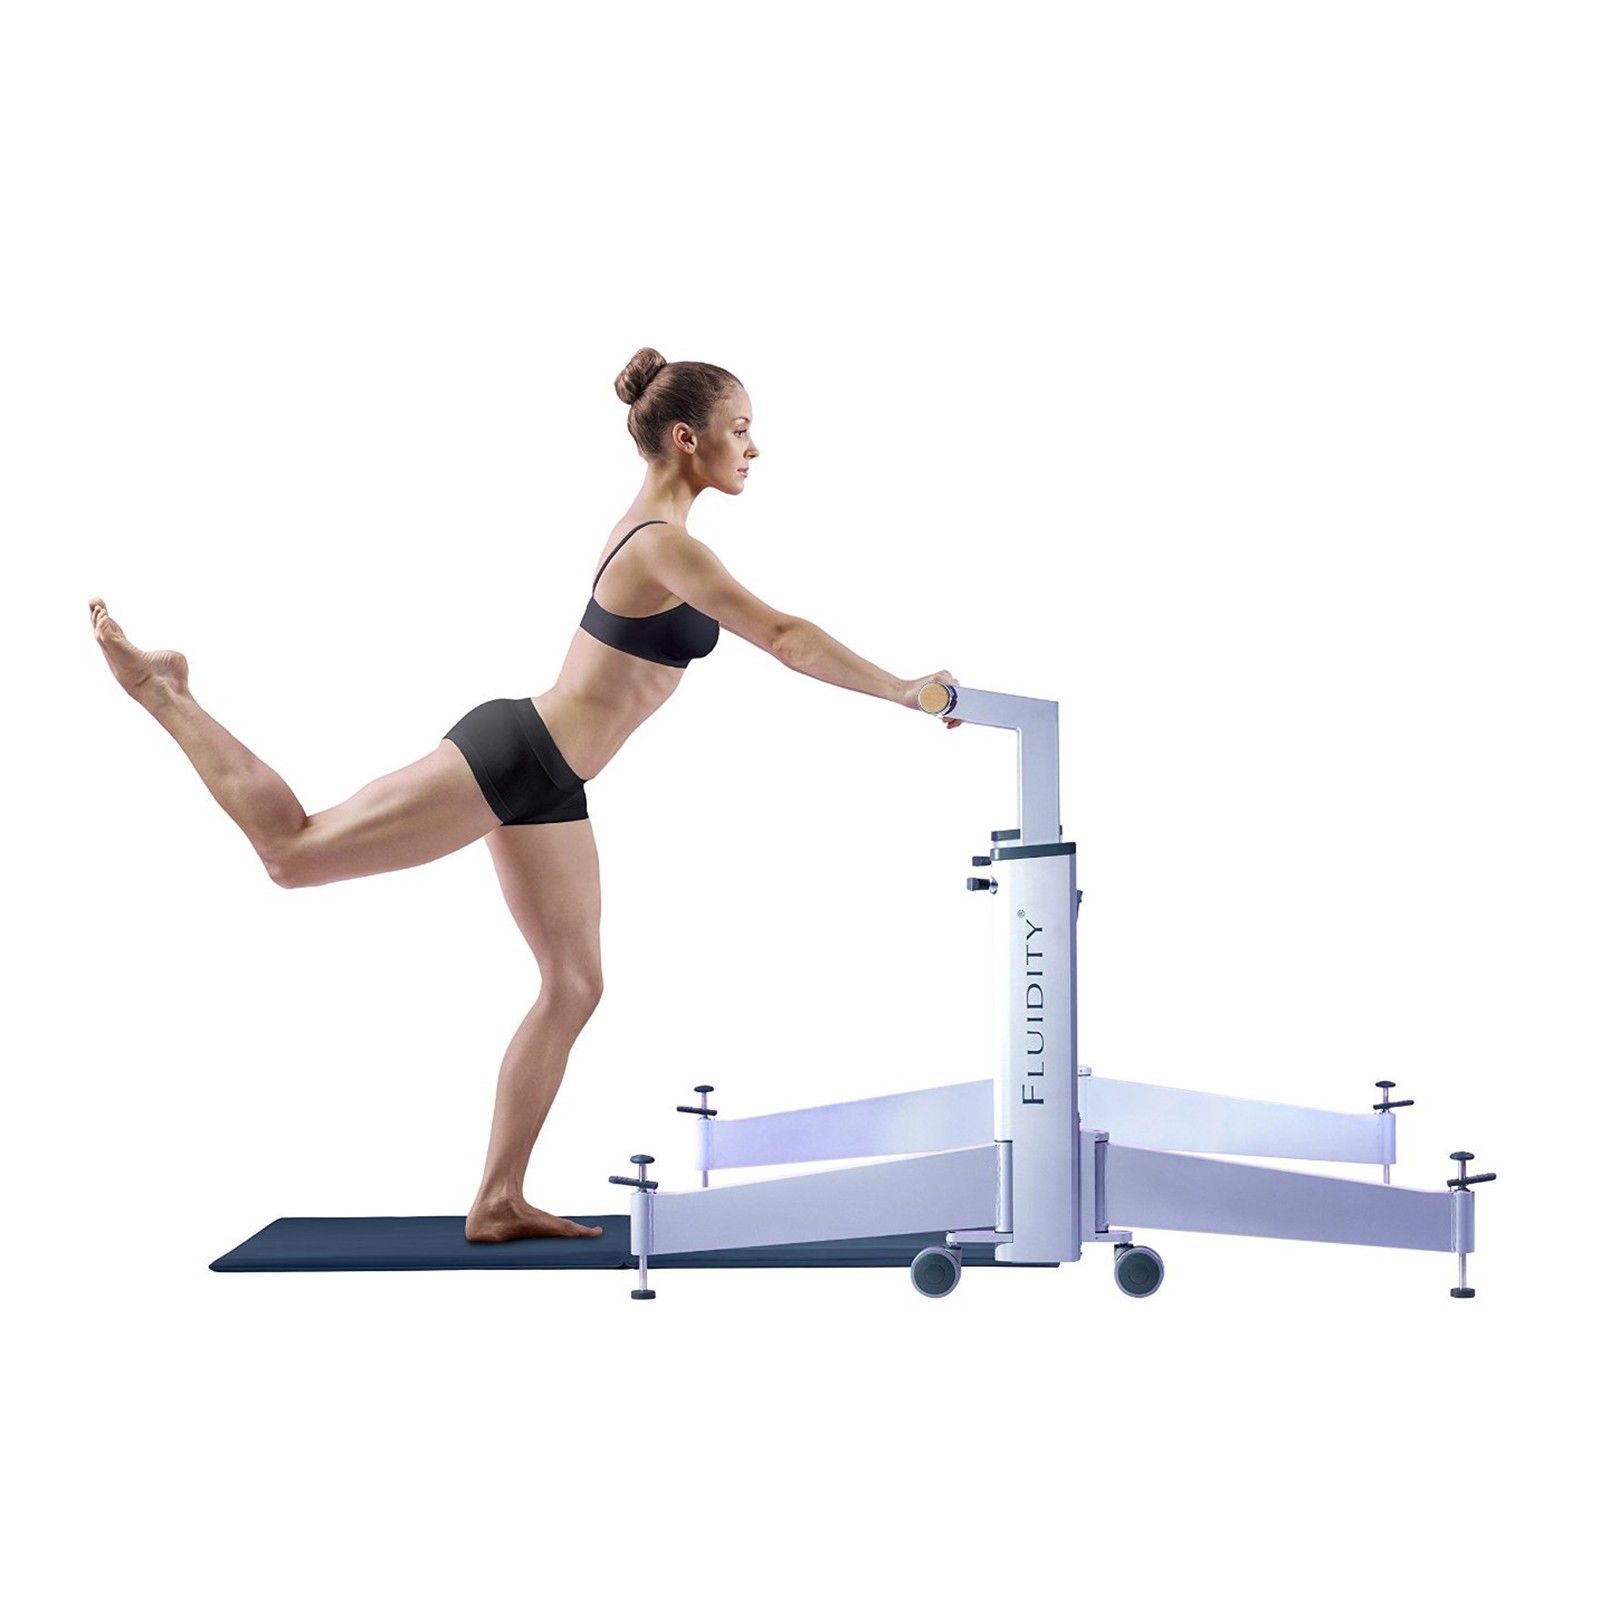 9 Fluidity Barre at home ideas  barre workout, workout, fluidity bar